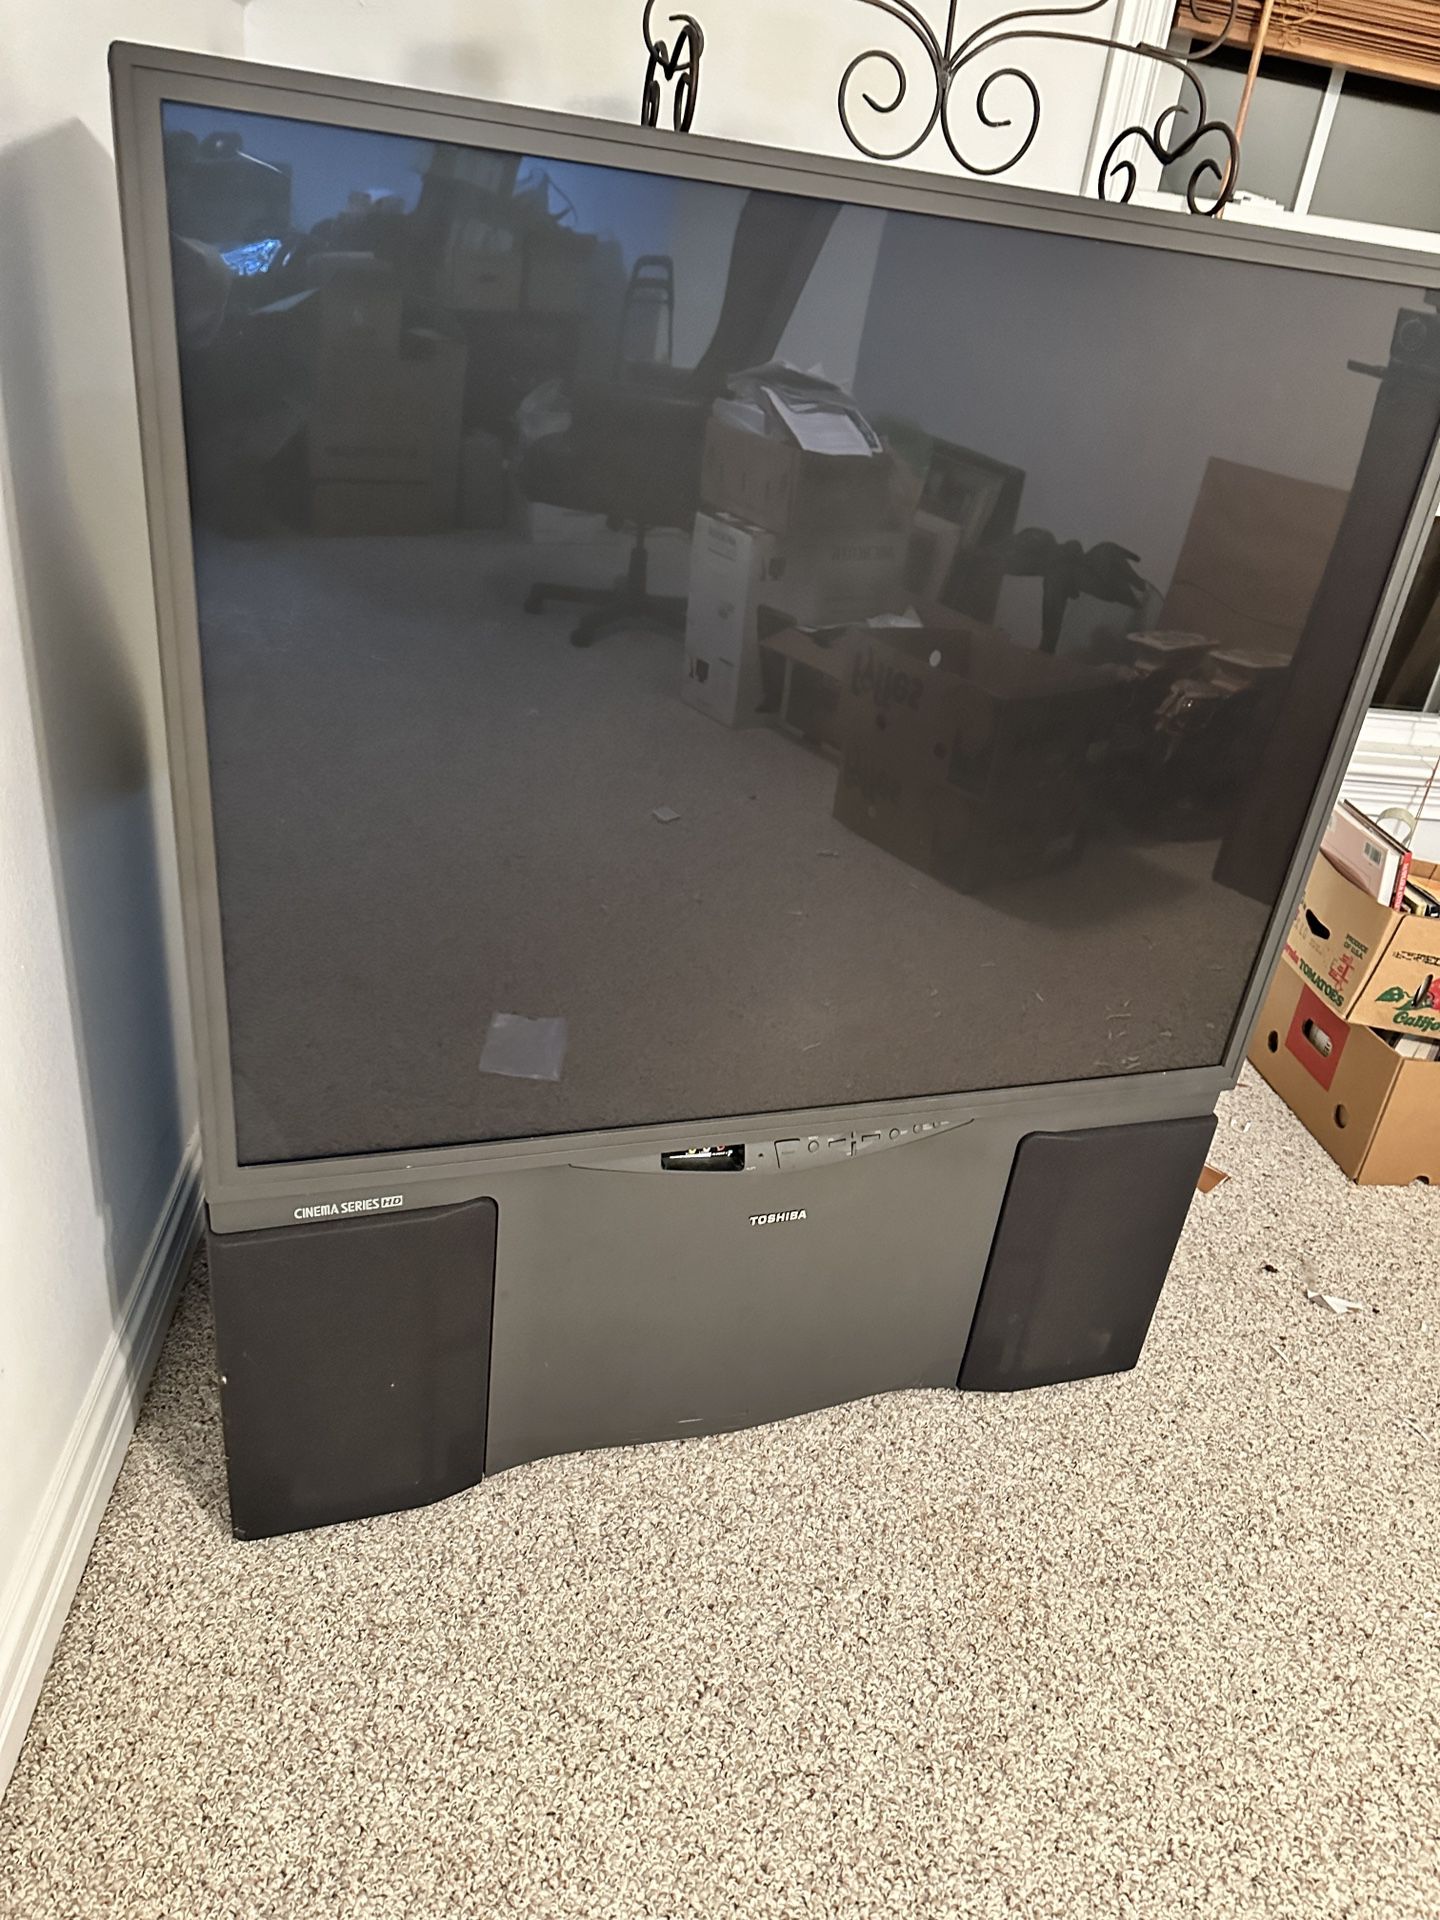 Free Working Projection TV